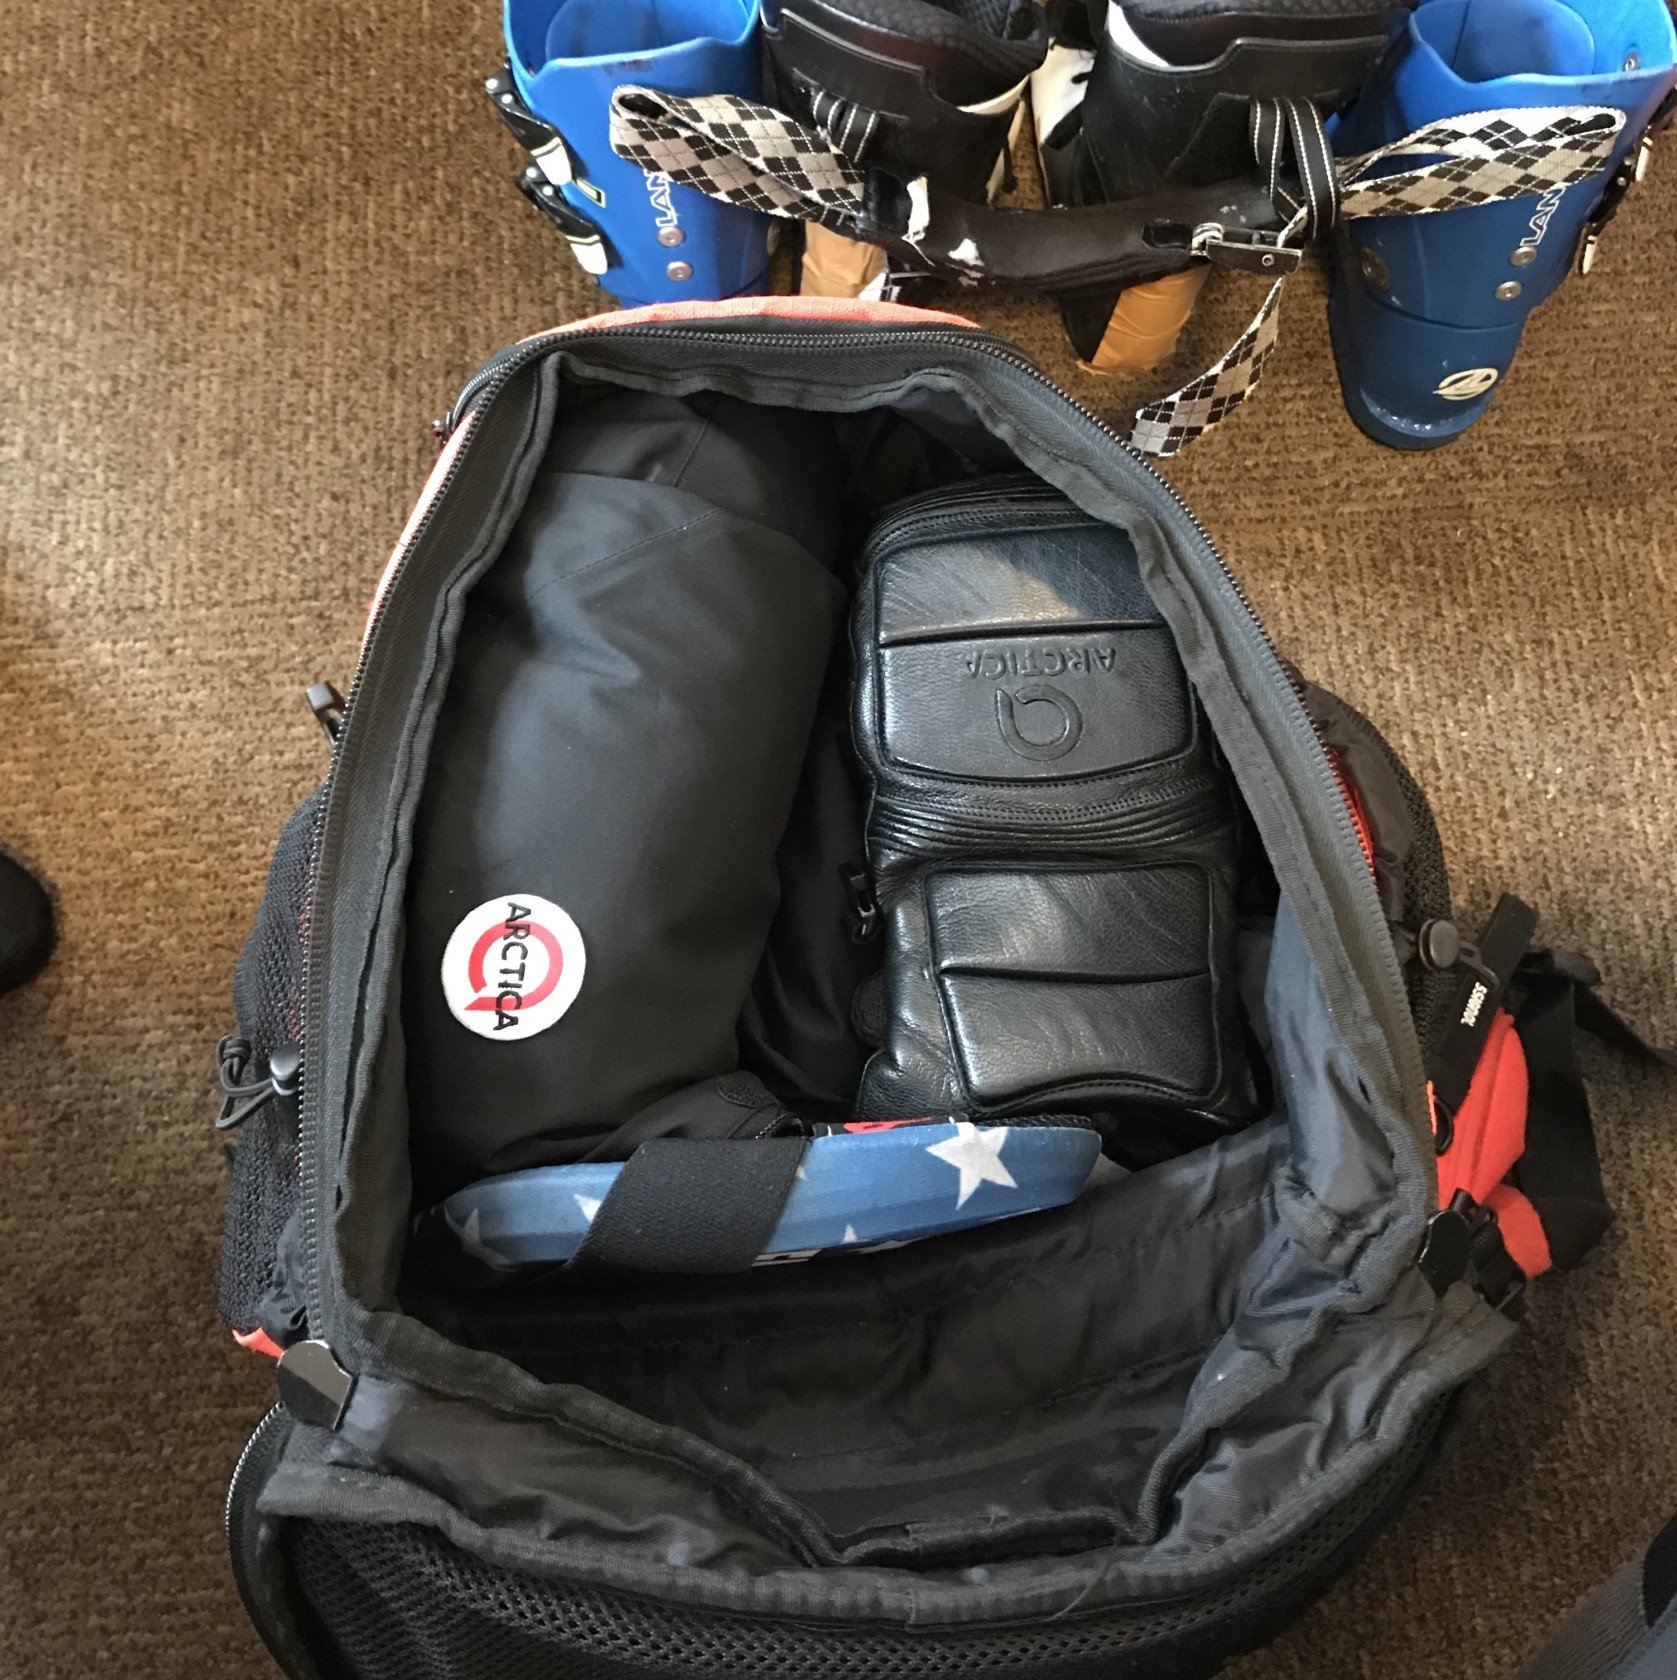 Ski racer's gear bag filled with Arctica gear.